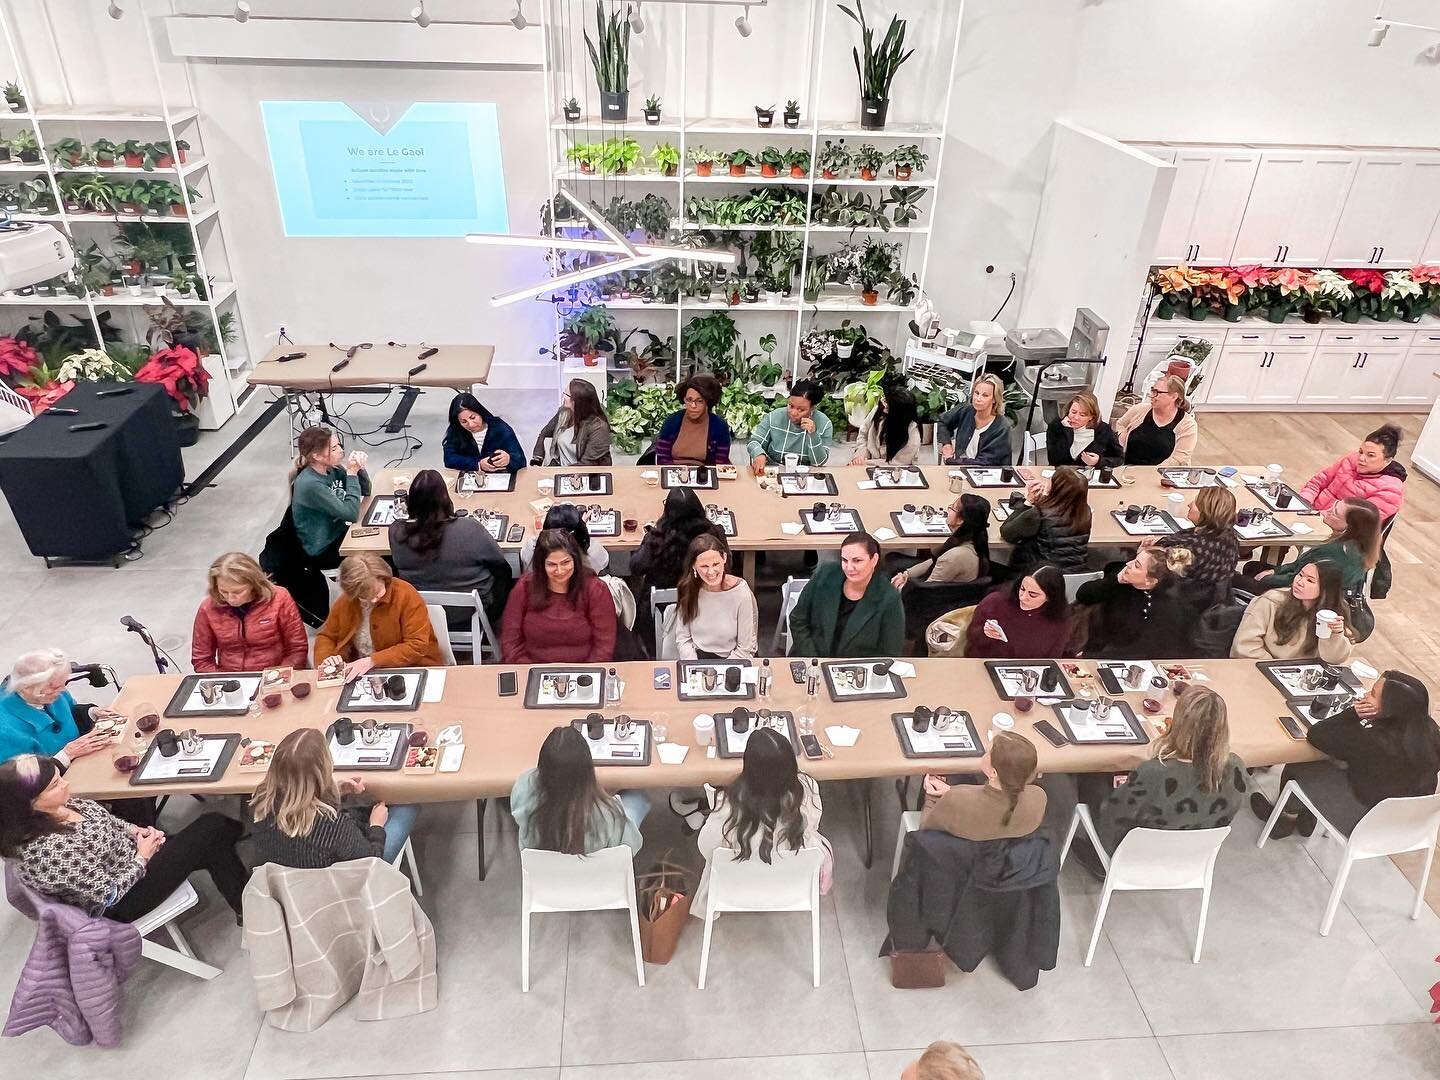 We&rsquo;re grateful for incredible workshop hosts like @legaolhome 🤍 Last week&rsquo;s candle making workshop had a great turn out and we can&rsquo;t wait for the next one! 

If you&rsquo;re interested in hosting a private workshop or partnering wi